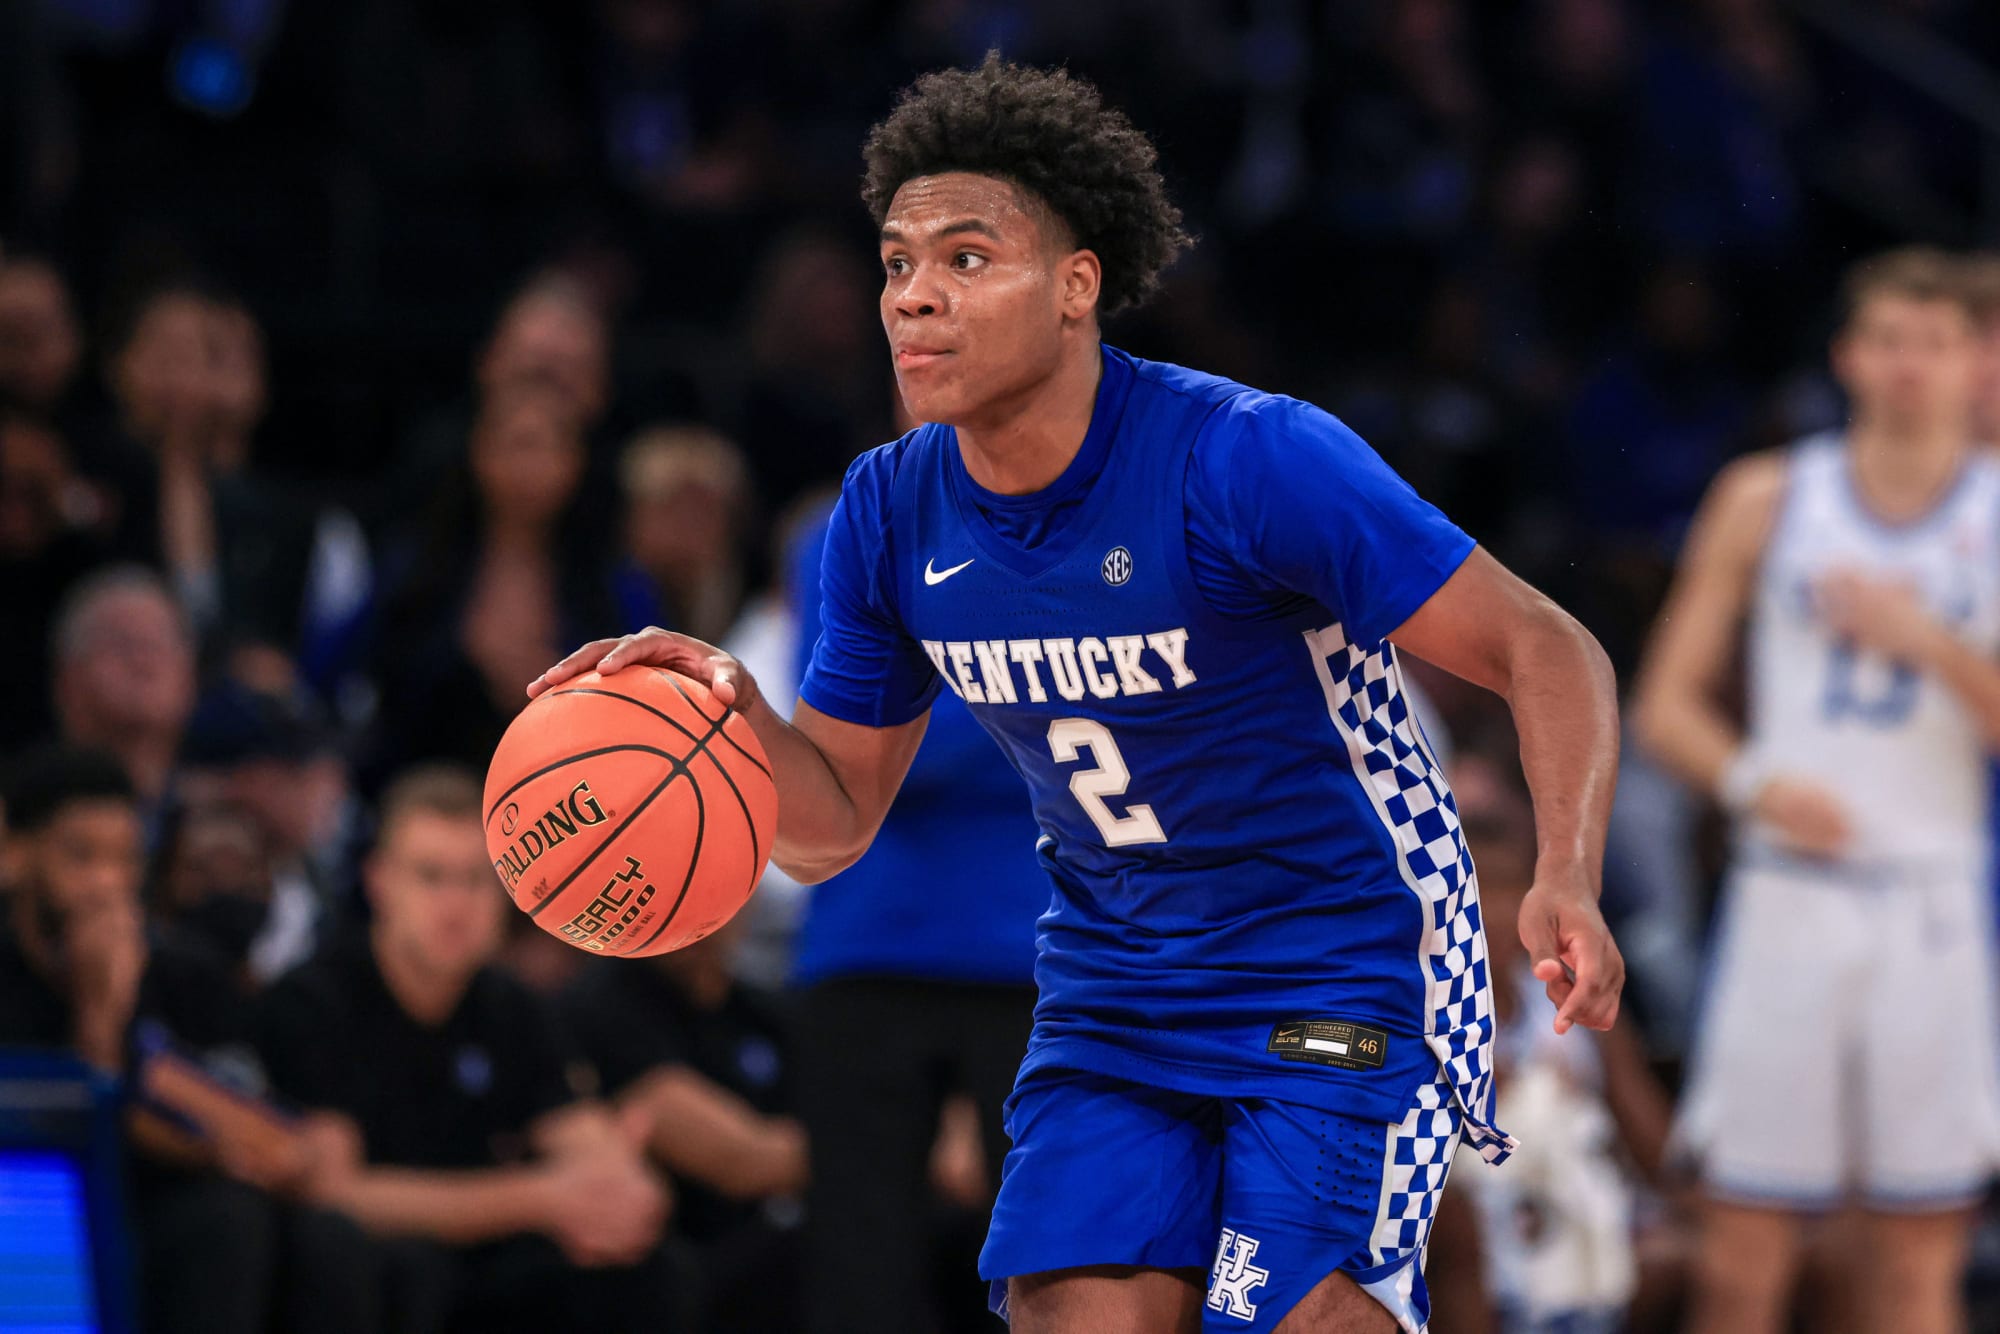 Kentucky Wildcats in New College Basketball Rankings, including